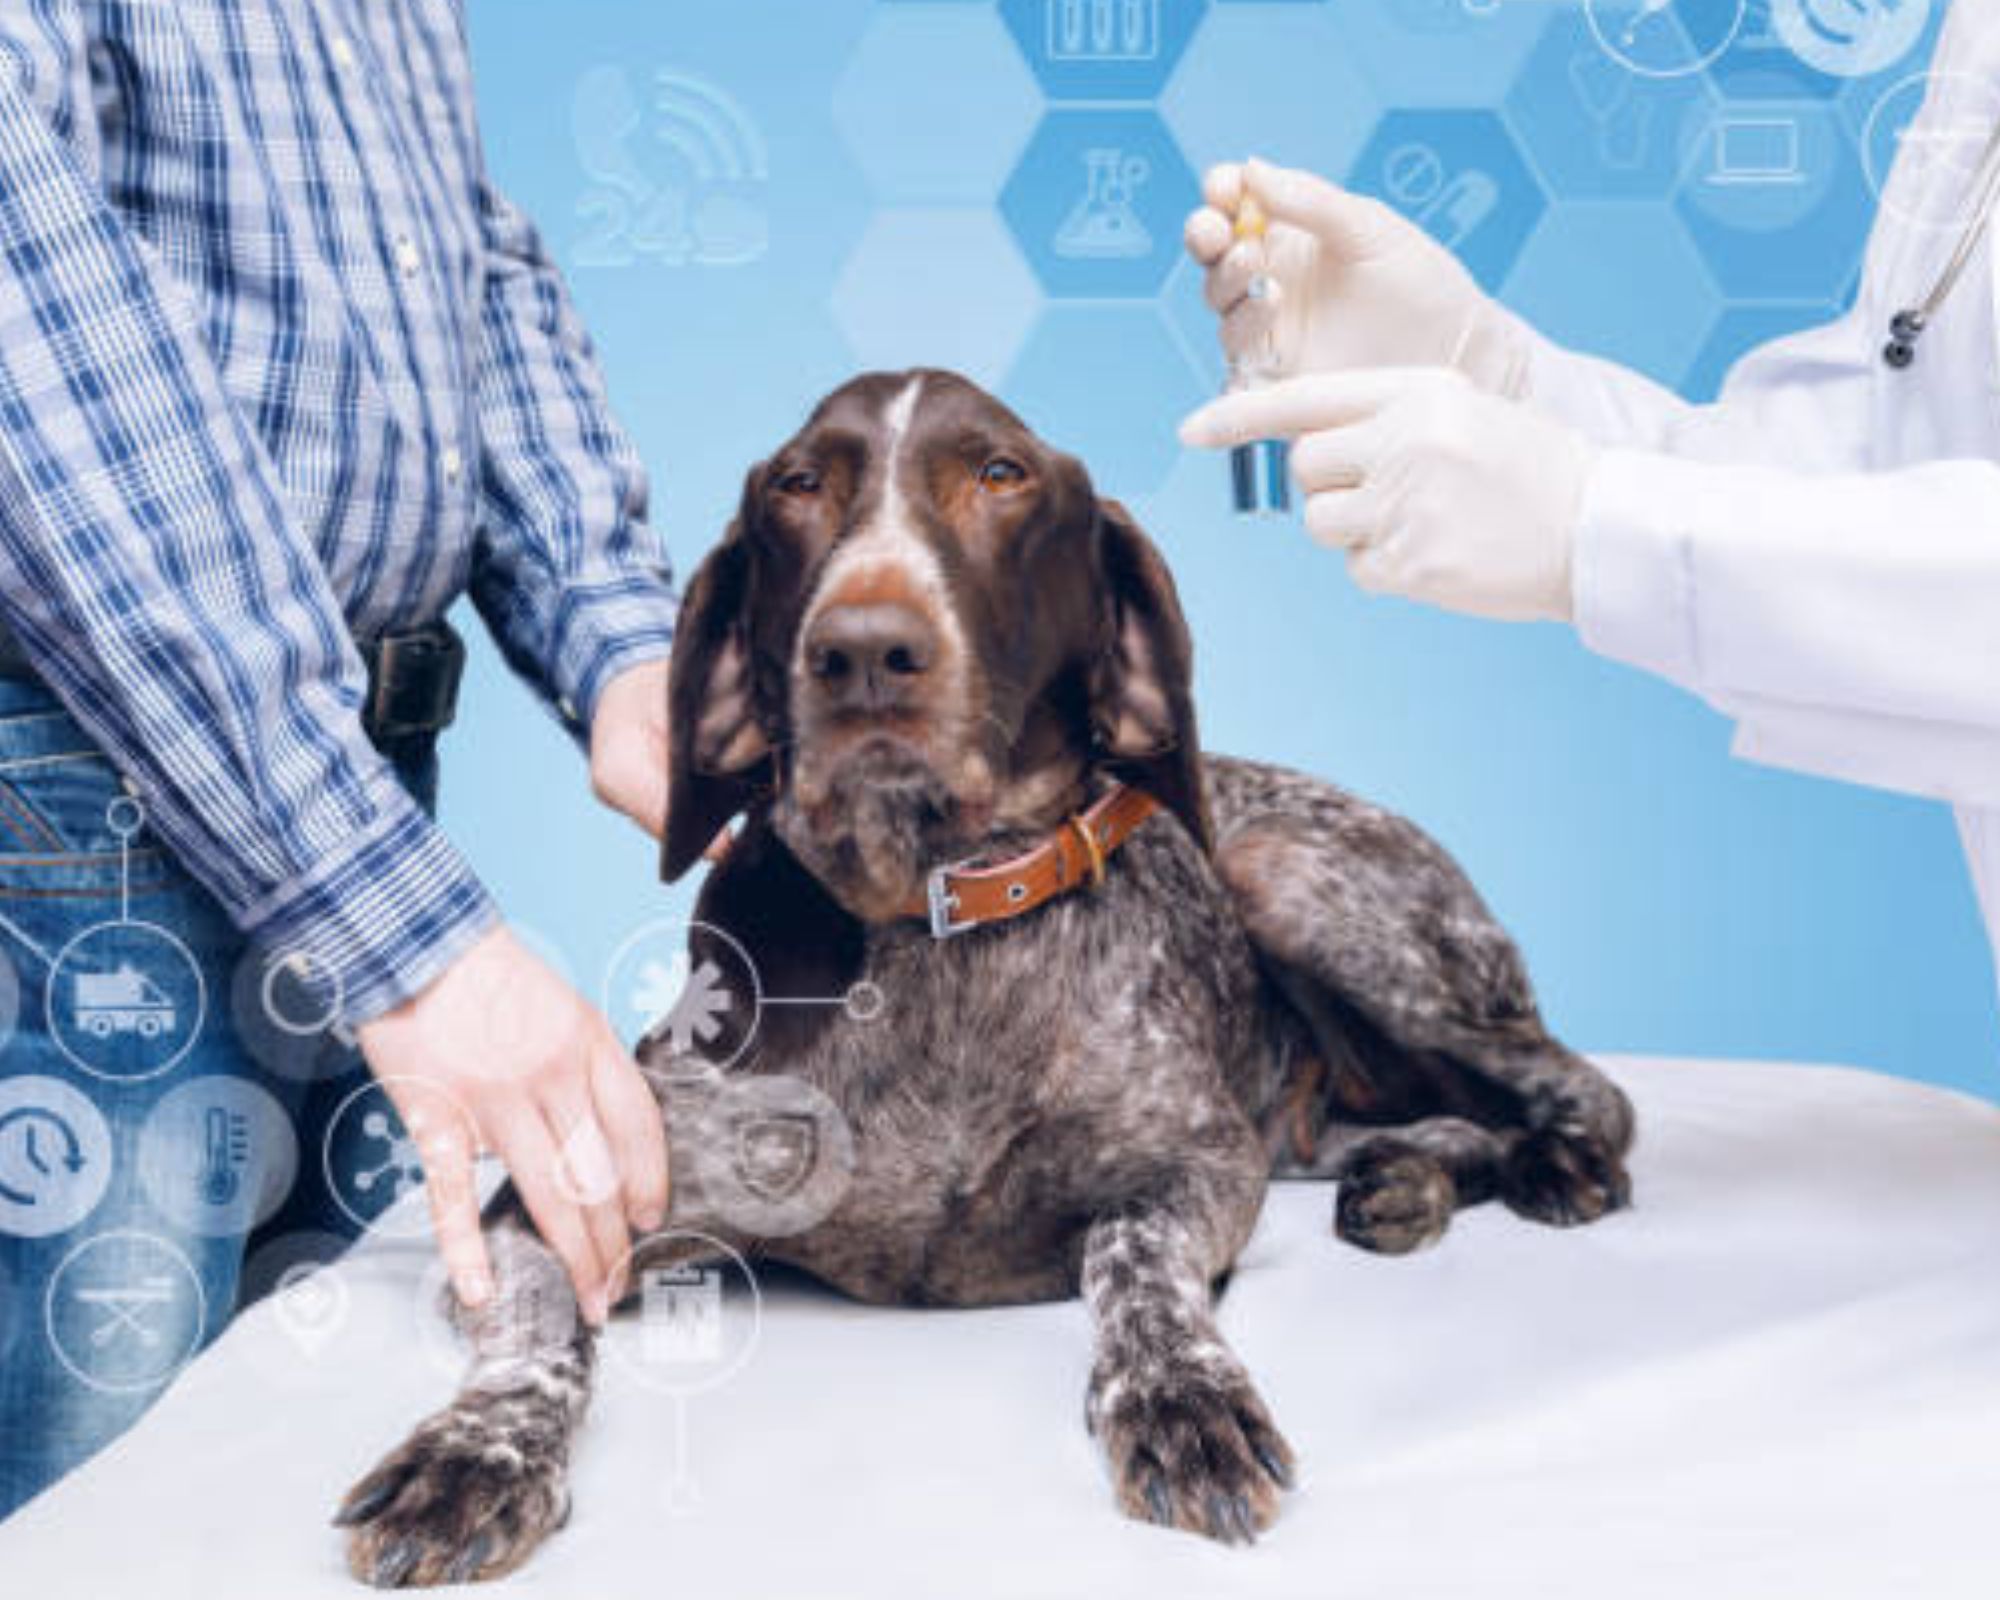 Canine Epistaxis: Understanding, Managing, and Treating Nosebleeds in Dogs